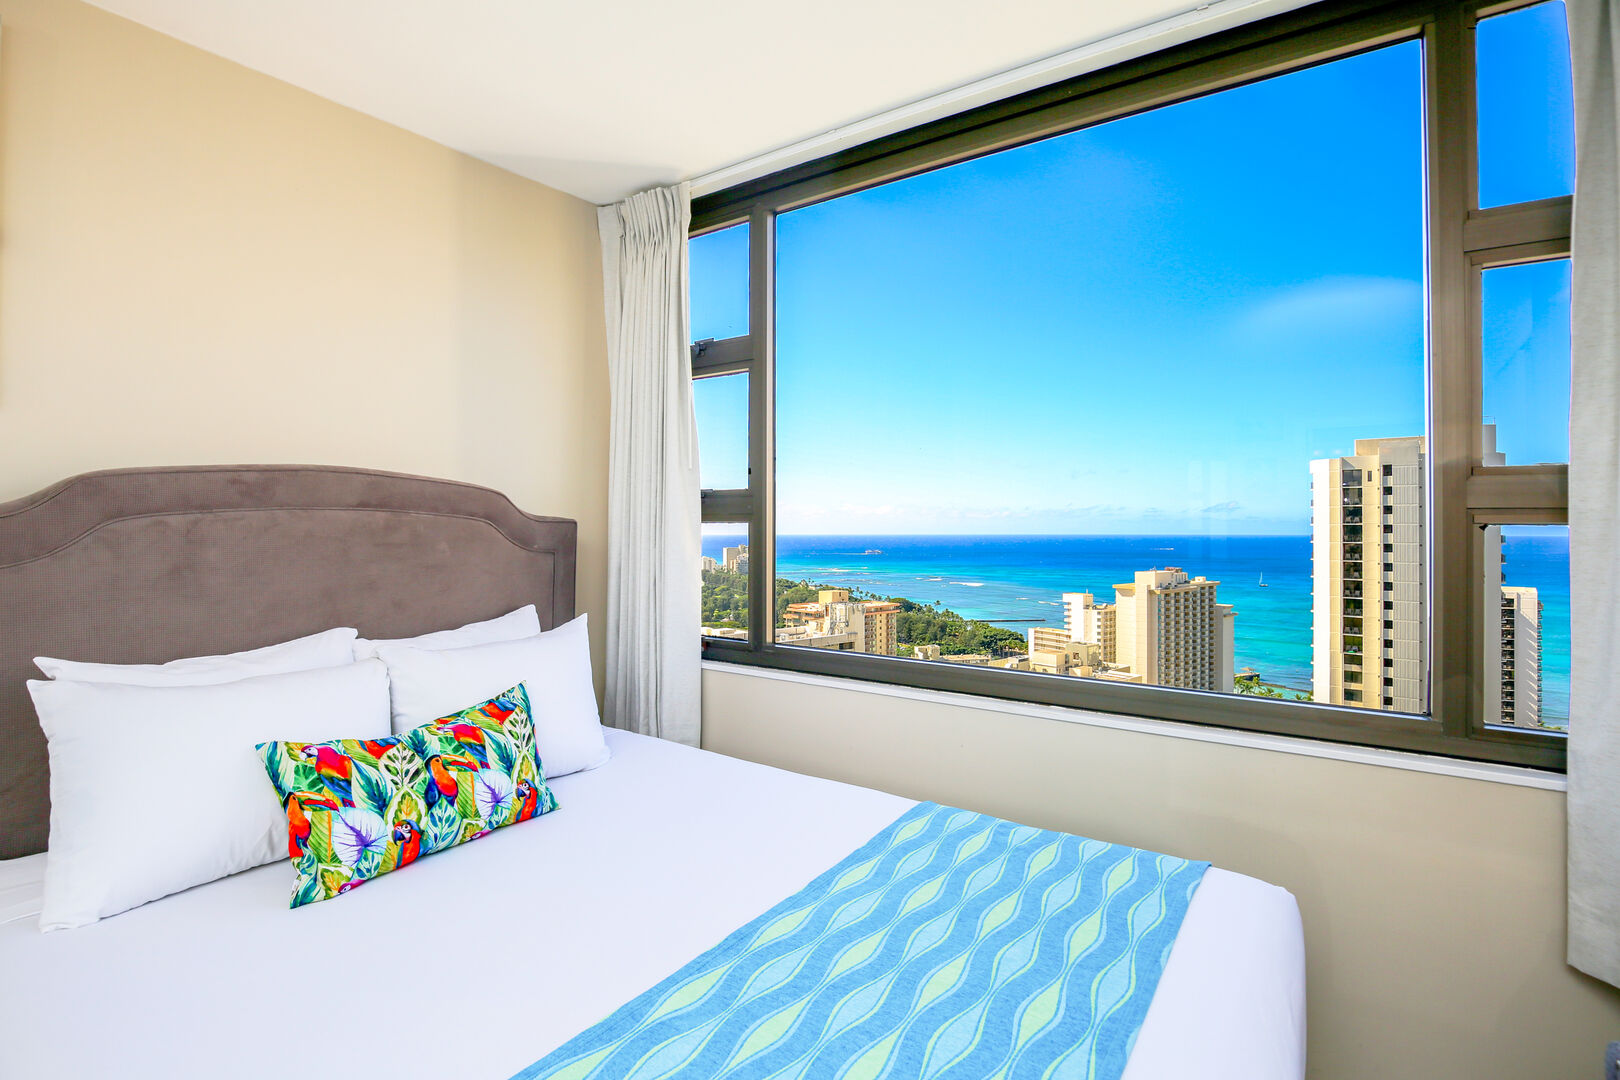 Enjoy the ocean view from the bedroom